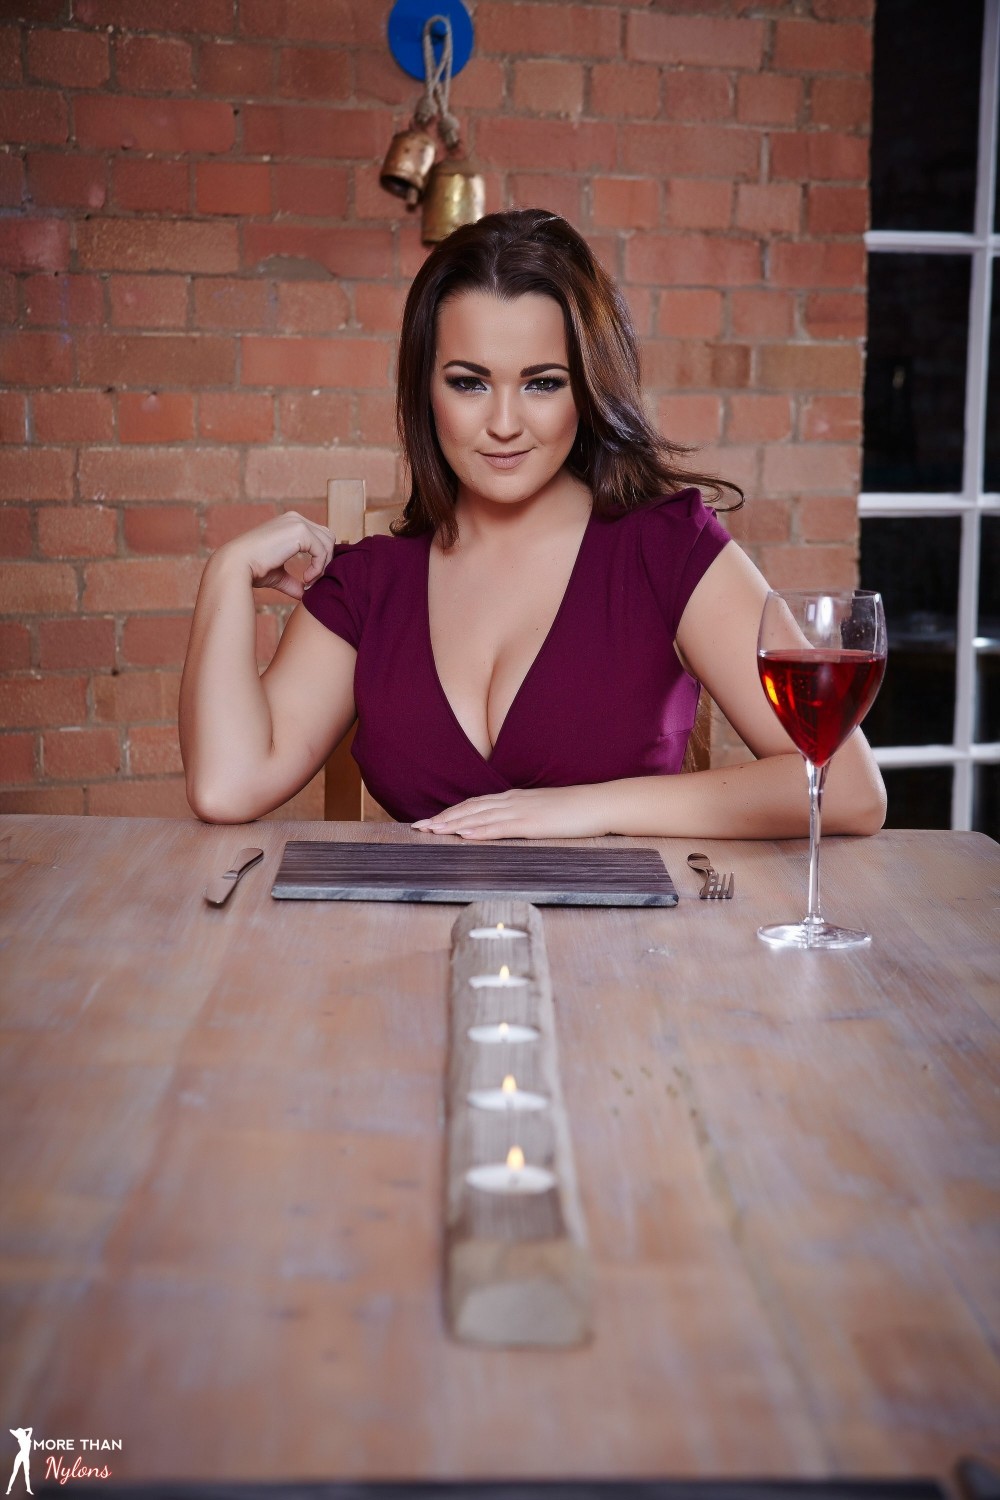 More Than Nylons 518661 Jodie Gasson So Whats The Main Course? More Than Nylons
